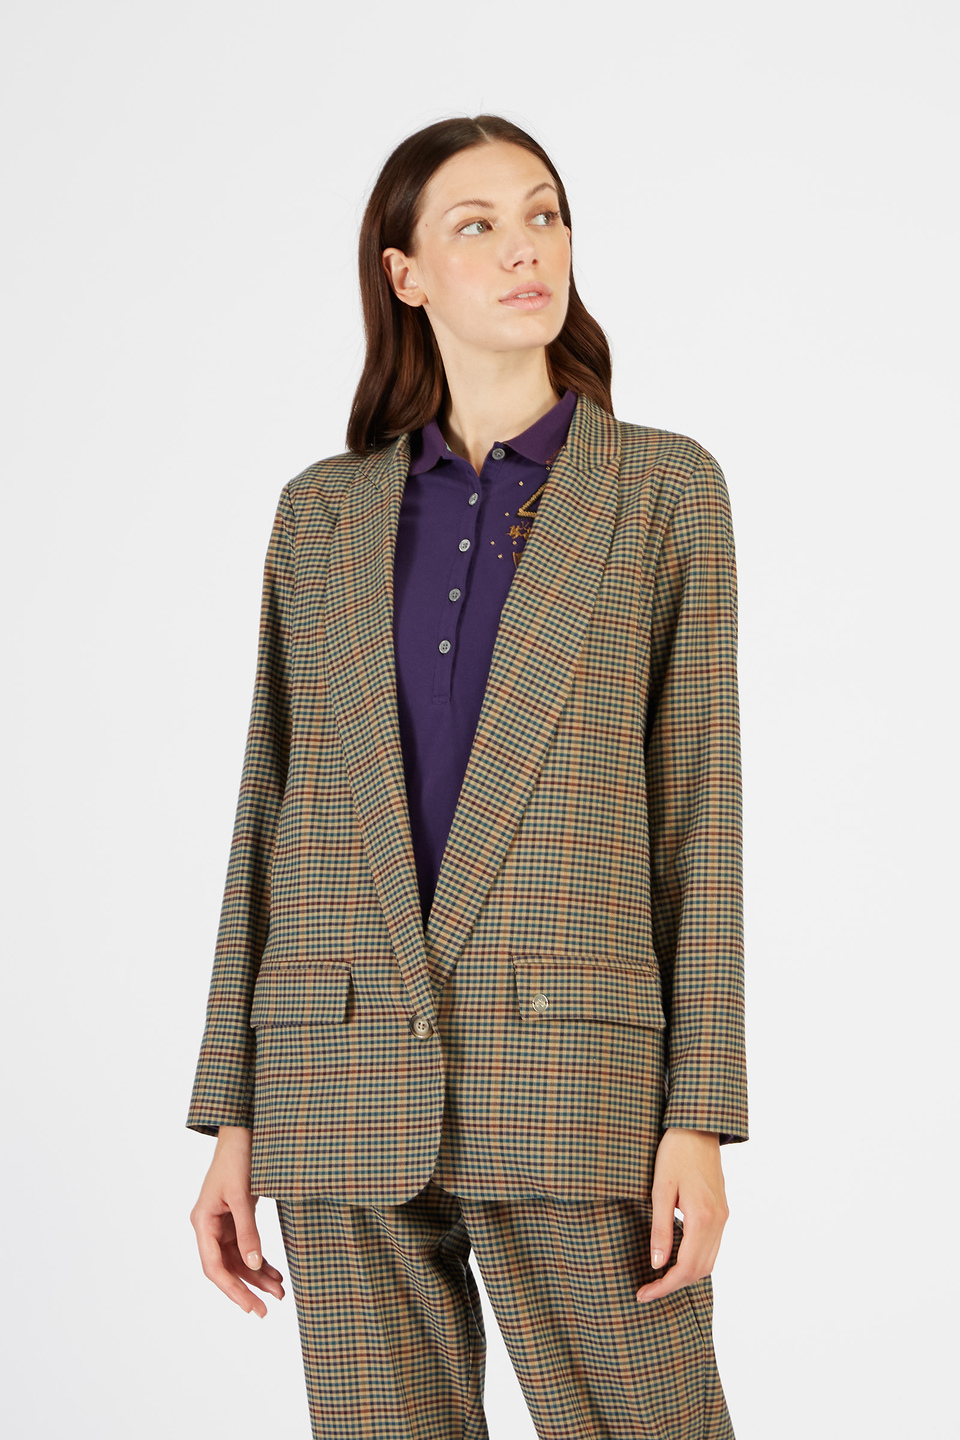 Women’s single-breasted twill jacquard blazer with pockets in regular fit | La Martina - Official Online Shop